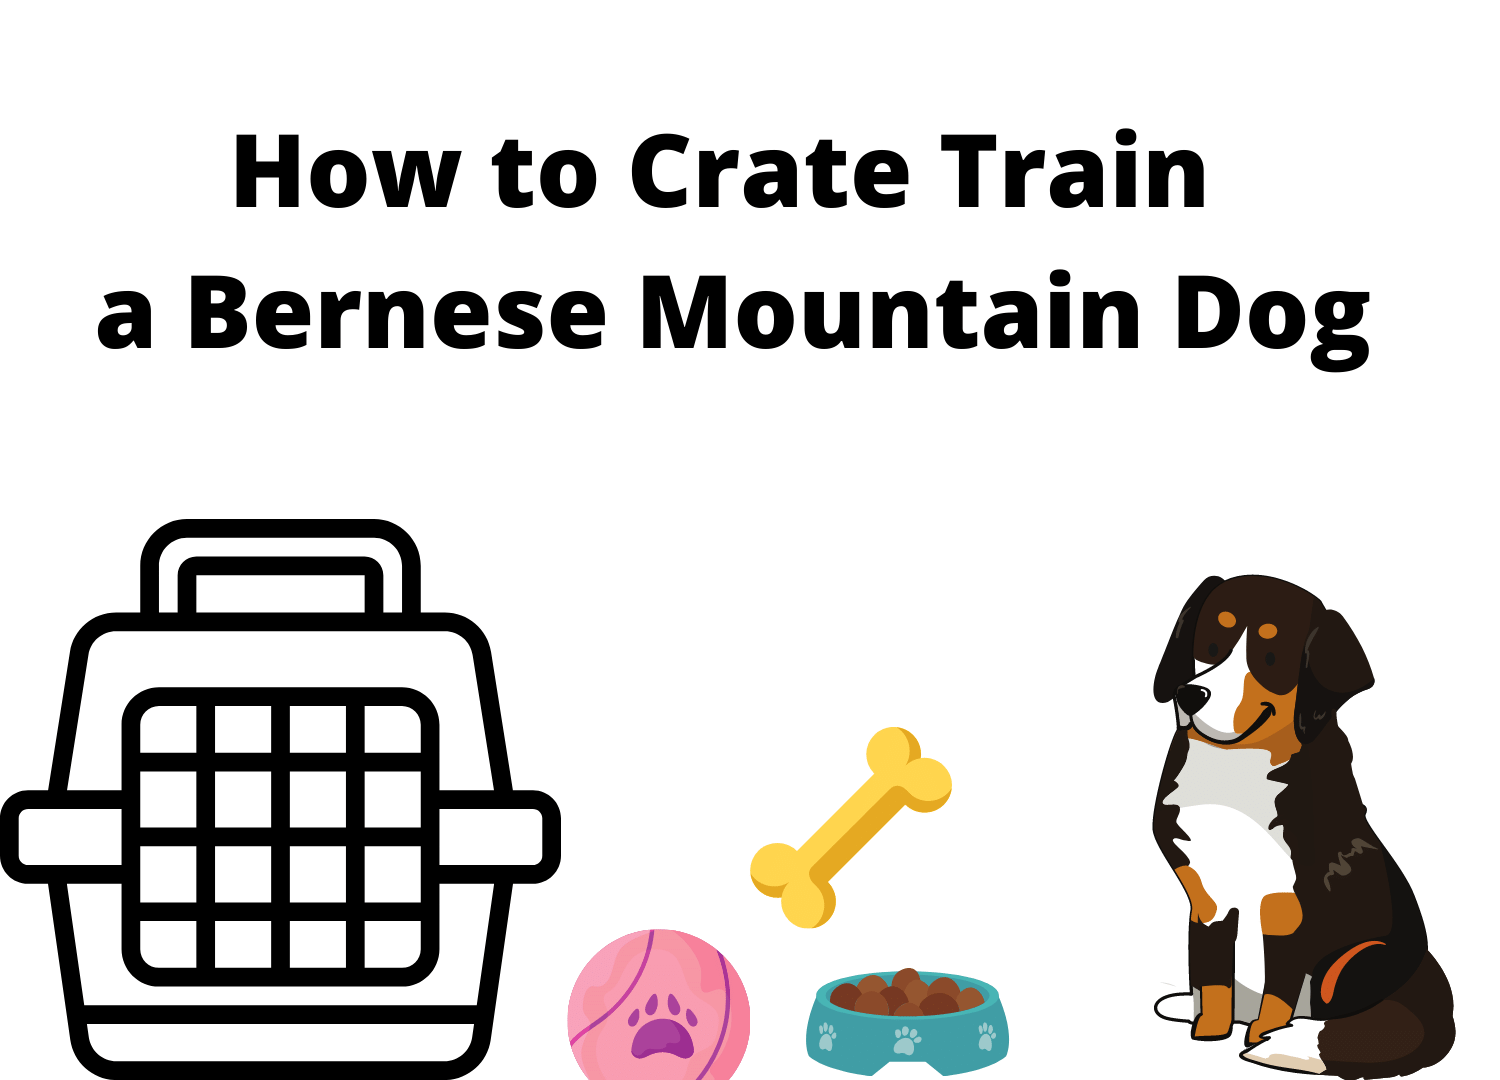 tis is for crate training of bernese mountain dog step by step through positive reinforcements and rewarding. By following the simple steps you can crate train your Bernese.